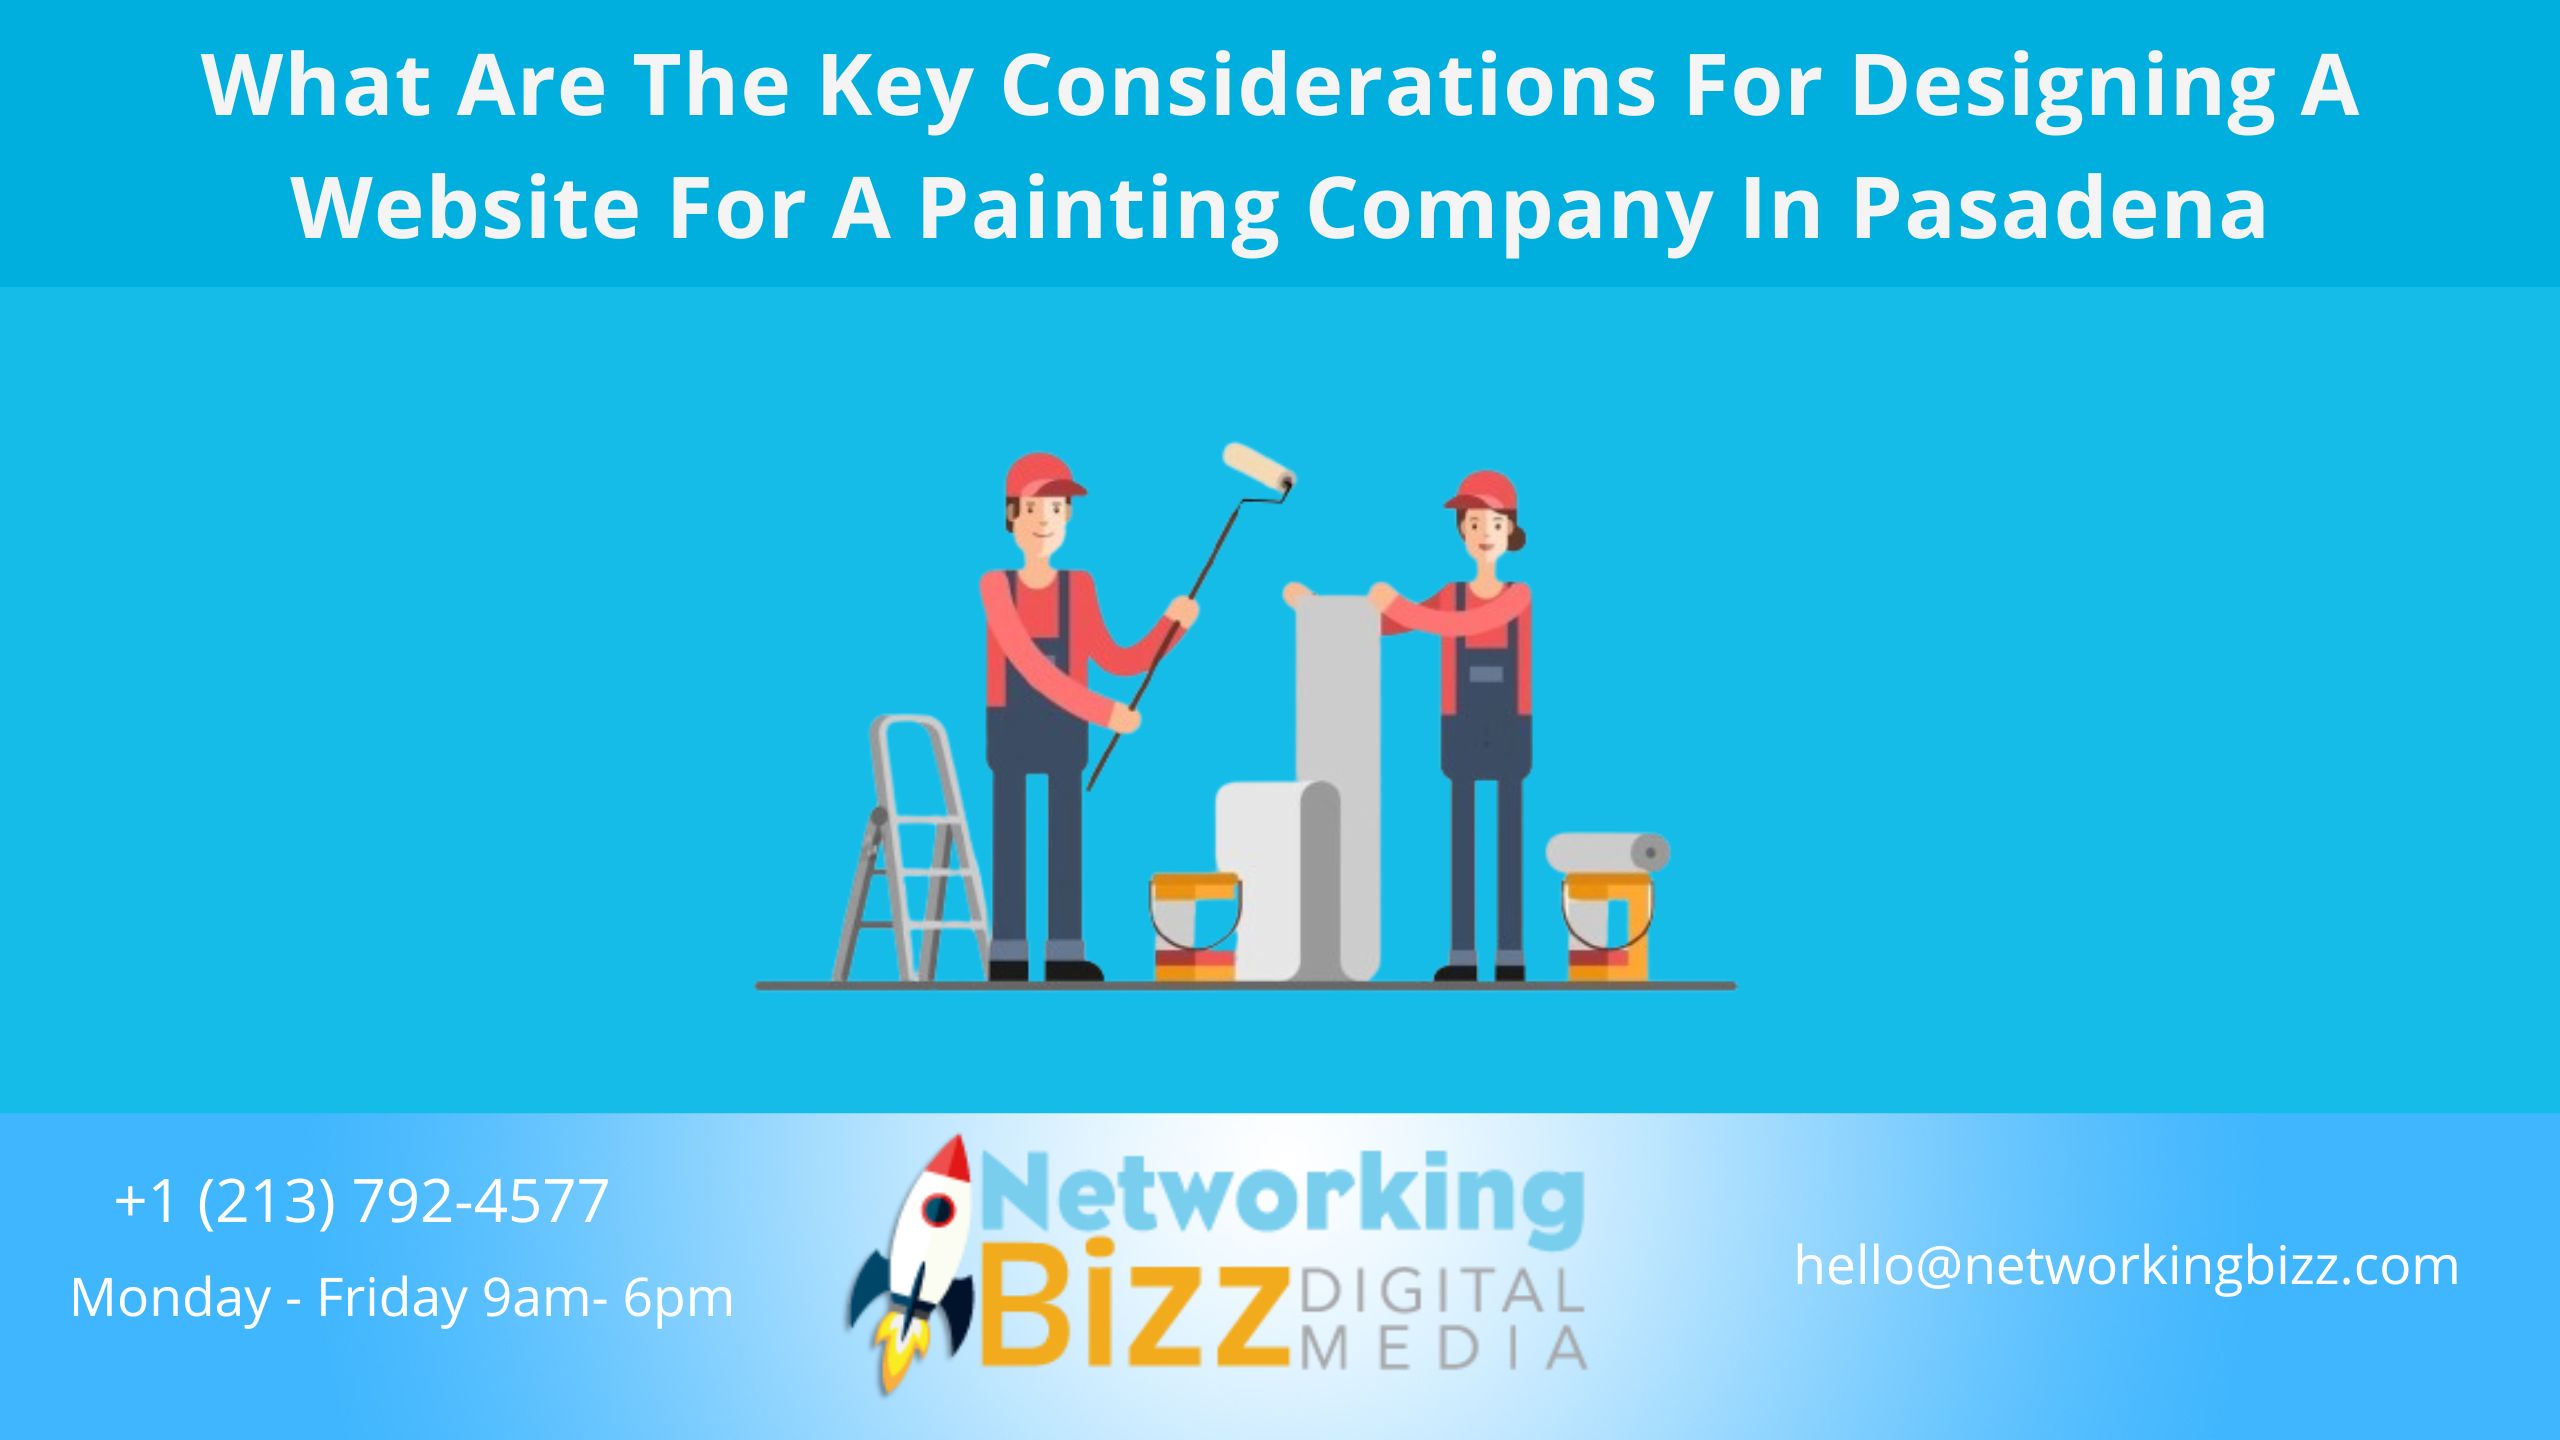 What Are The Key Considerations For Designing A Website For A Painting Company In Pasadena